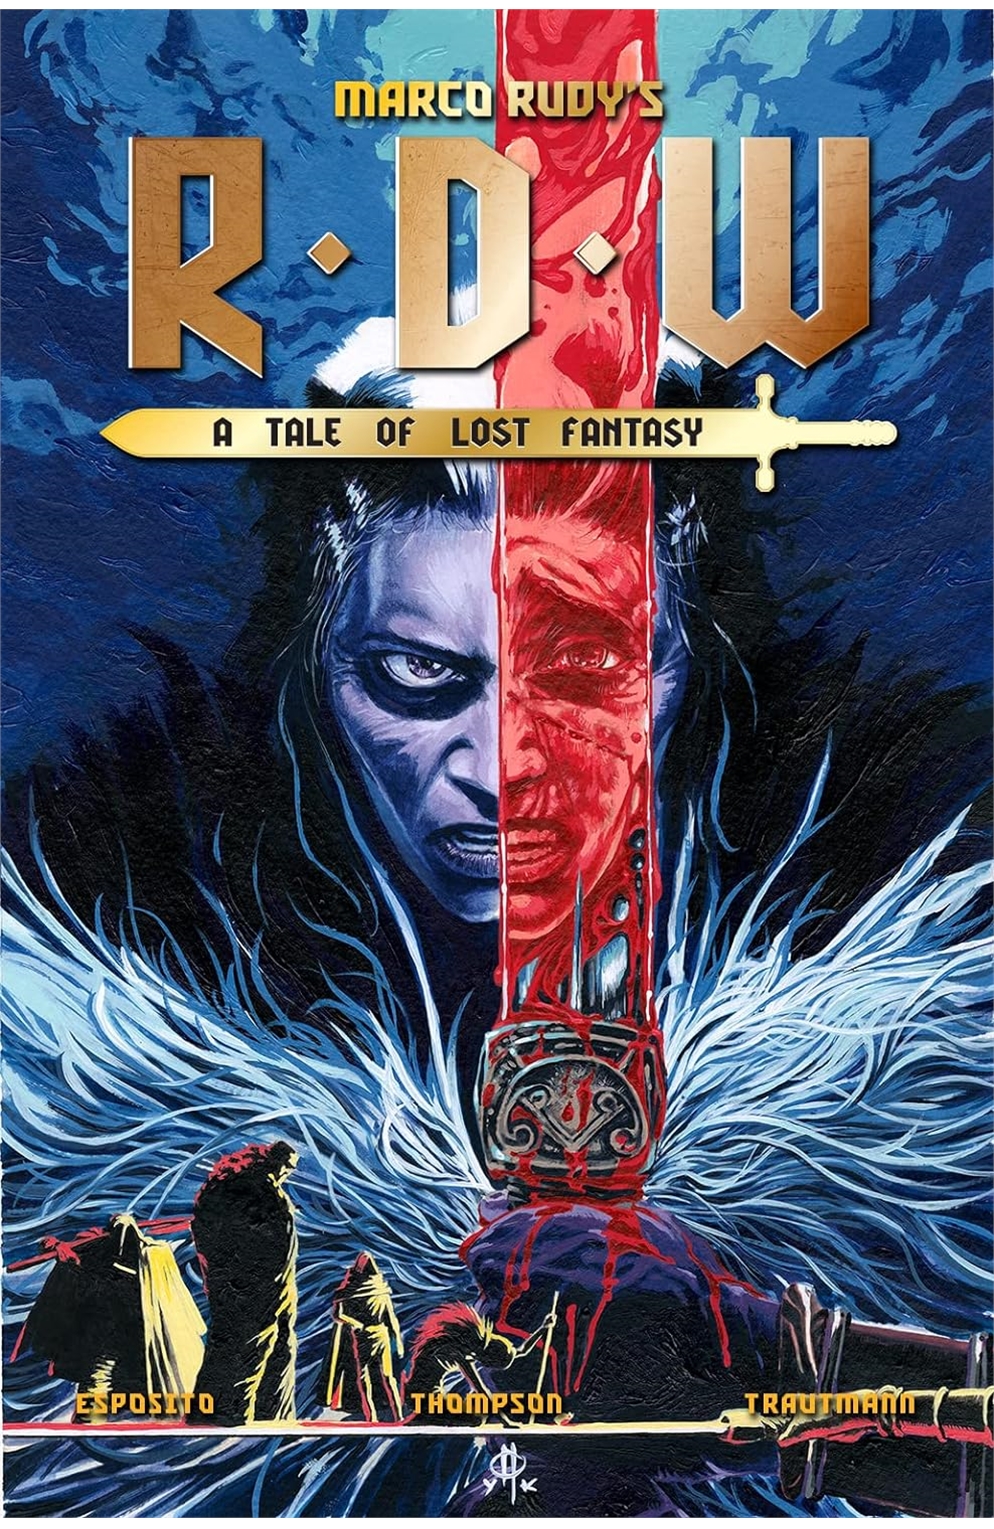 Rdw - A Tale of Lost Fantasy